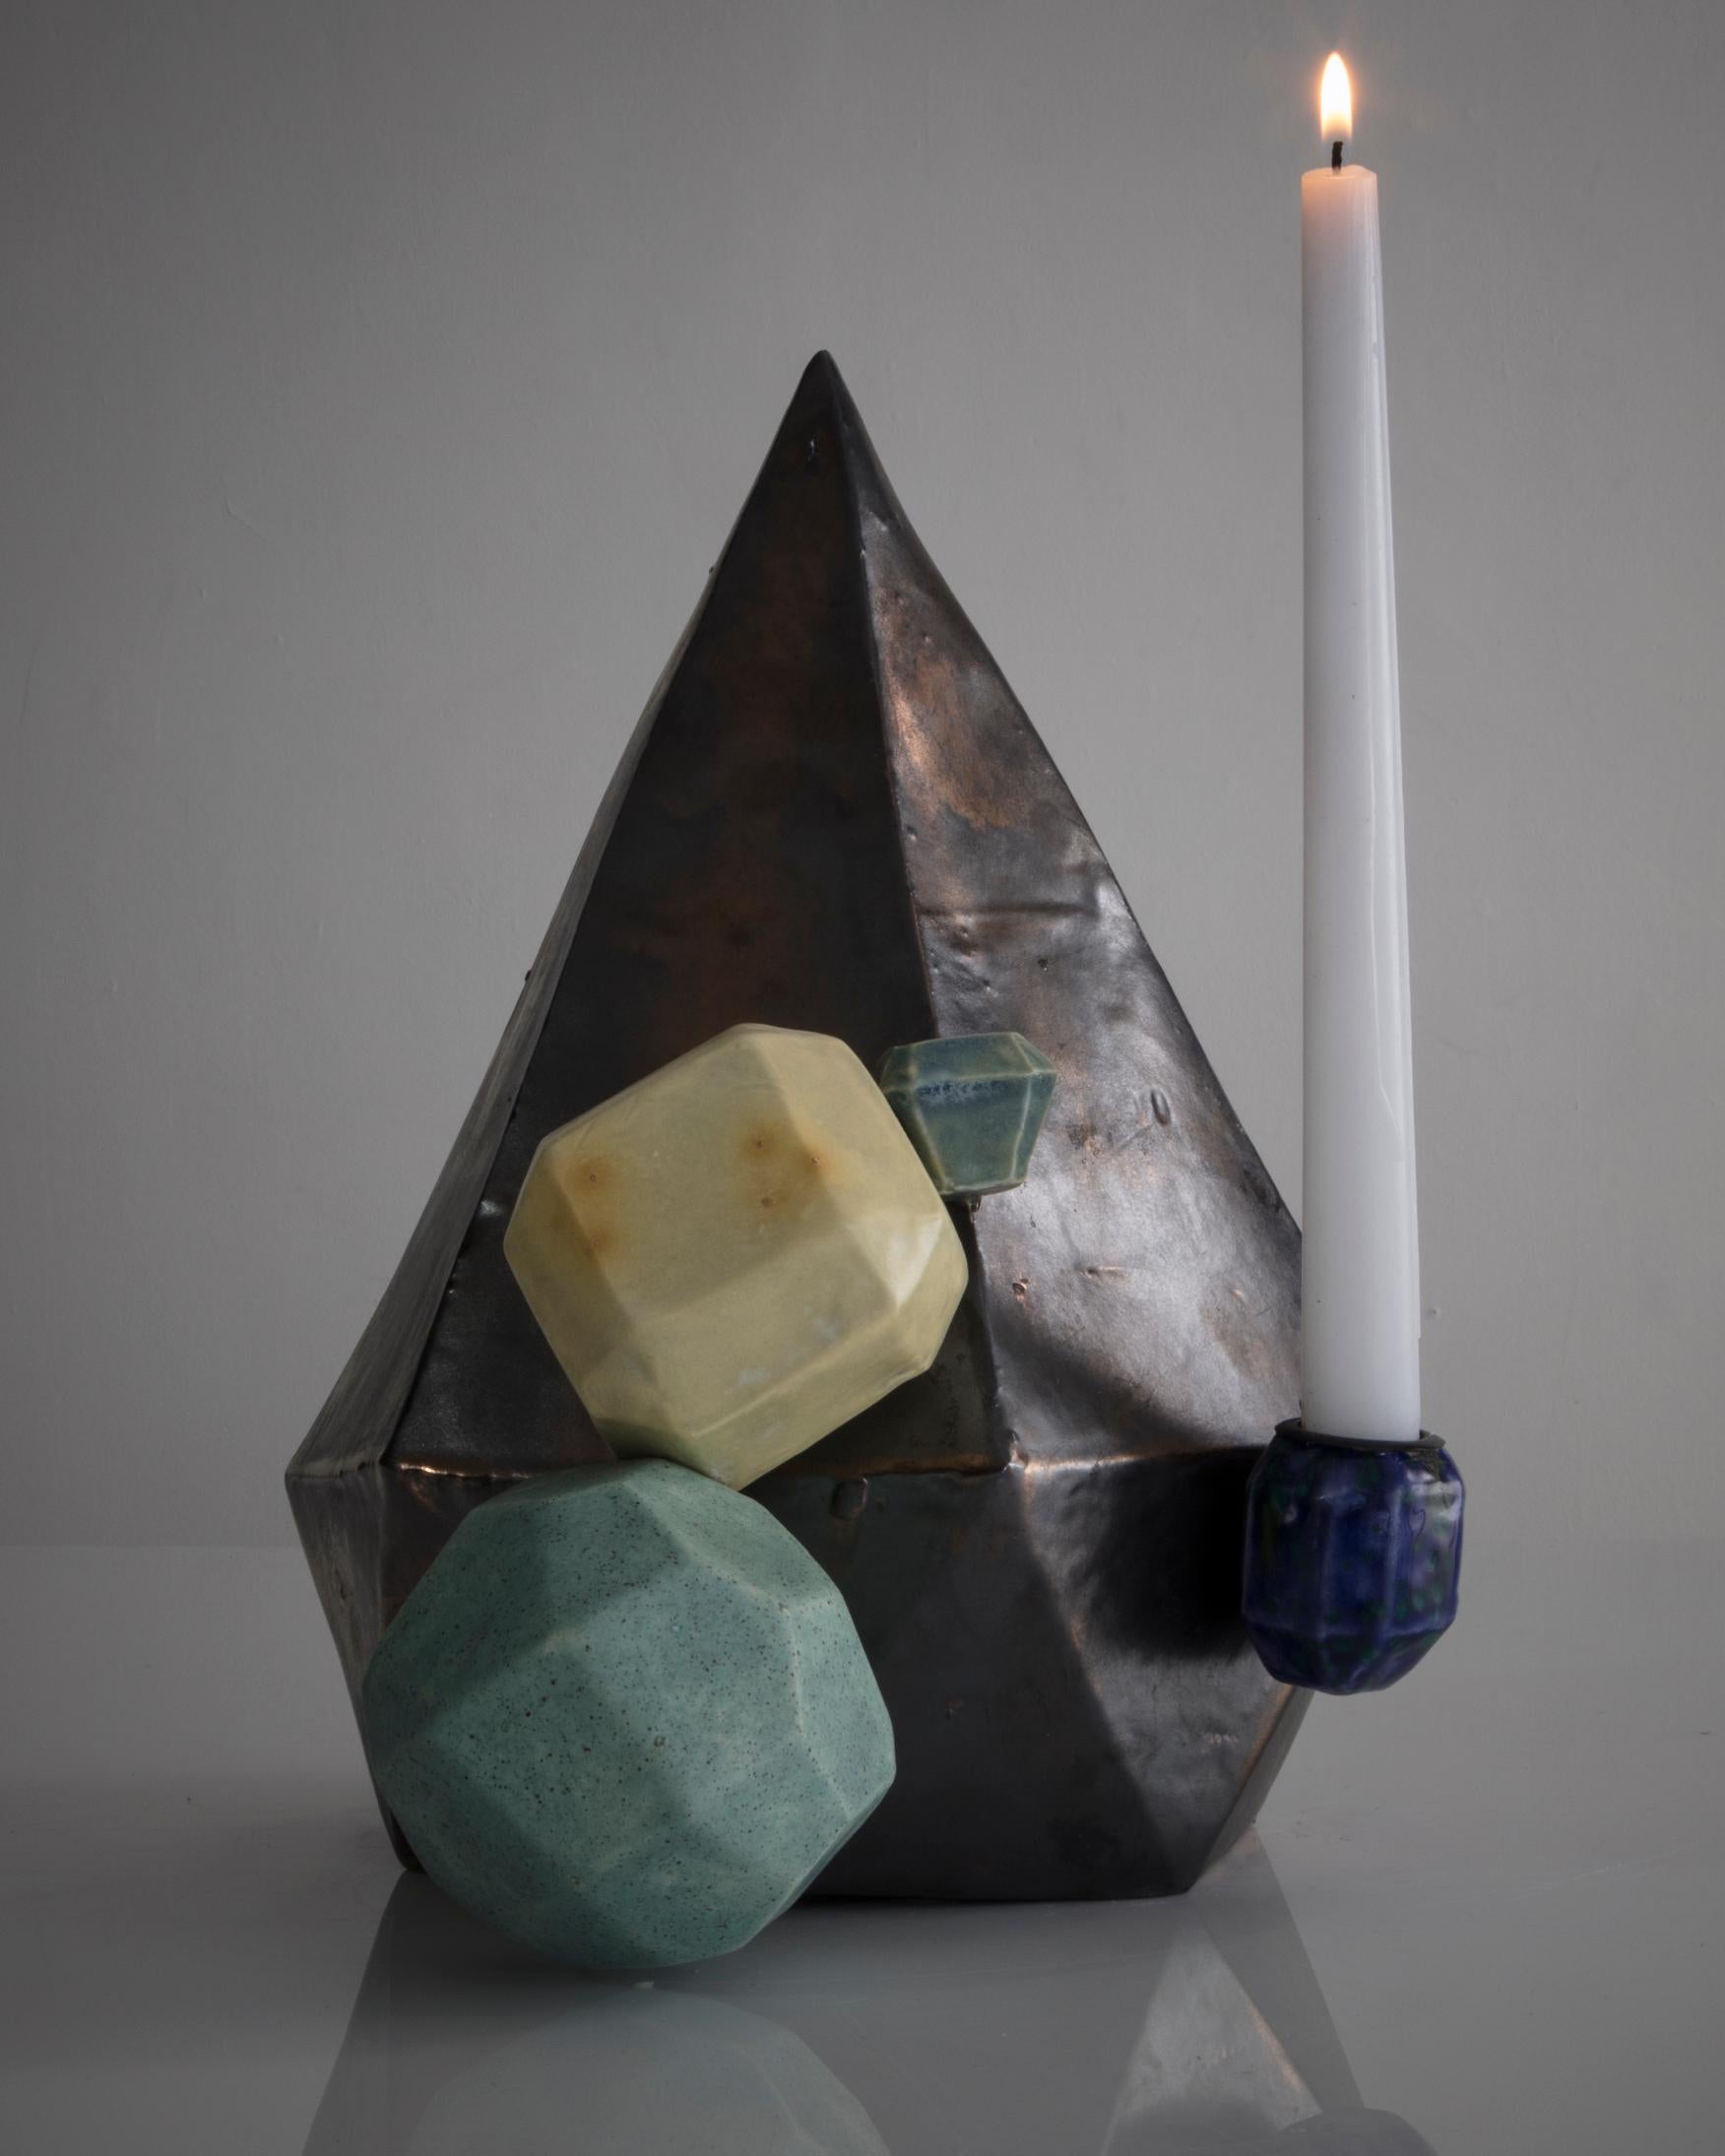 Medium Gem Cluster from the Cluster Series in glazed ceramic. Designed and made by Kelly Lamb, USA, 2017.
   